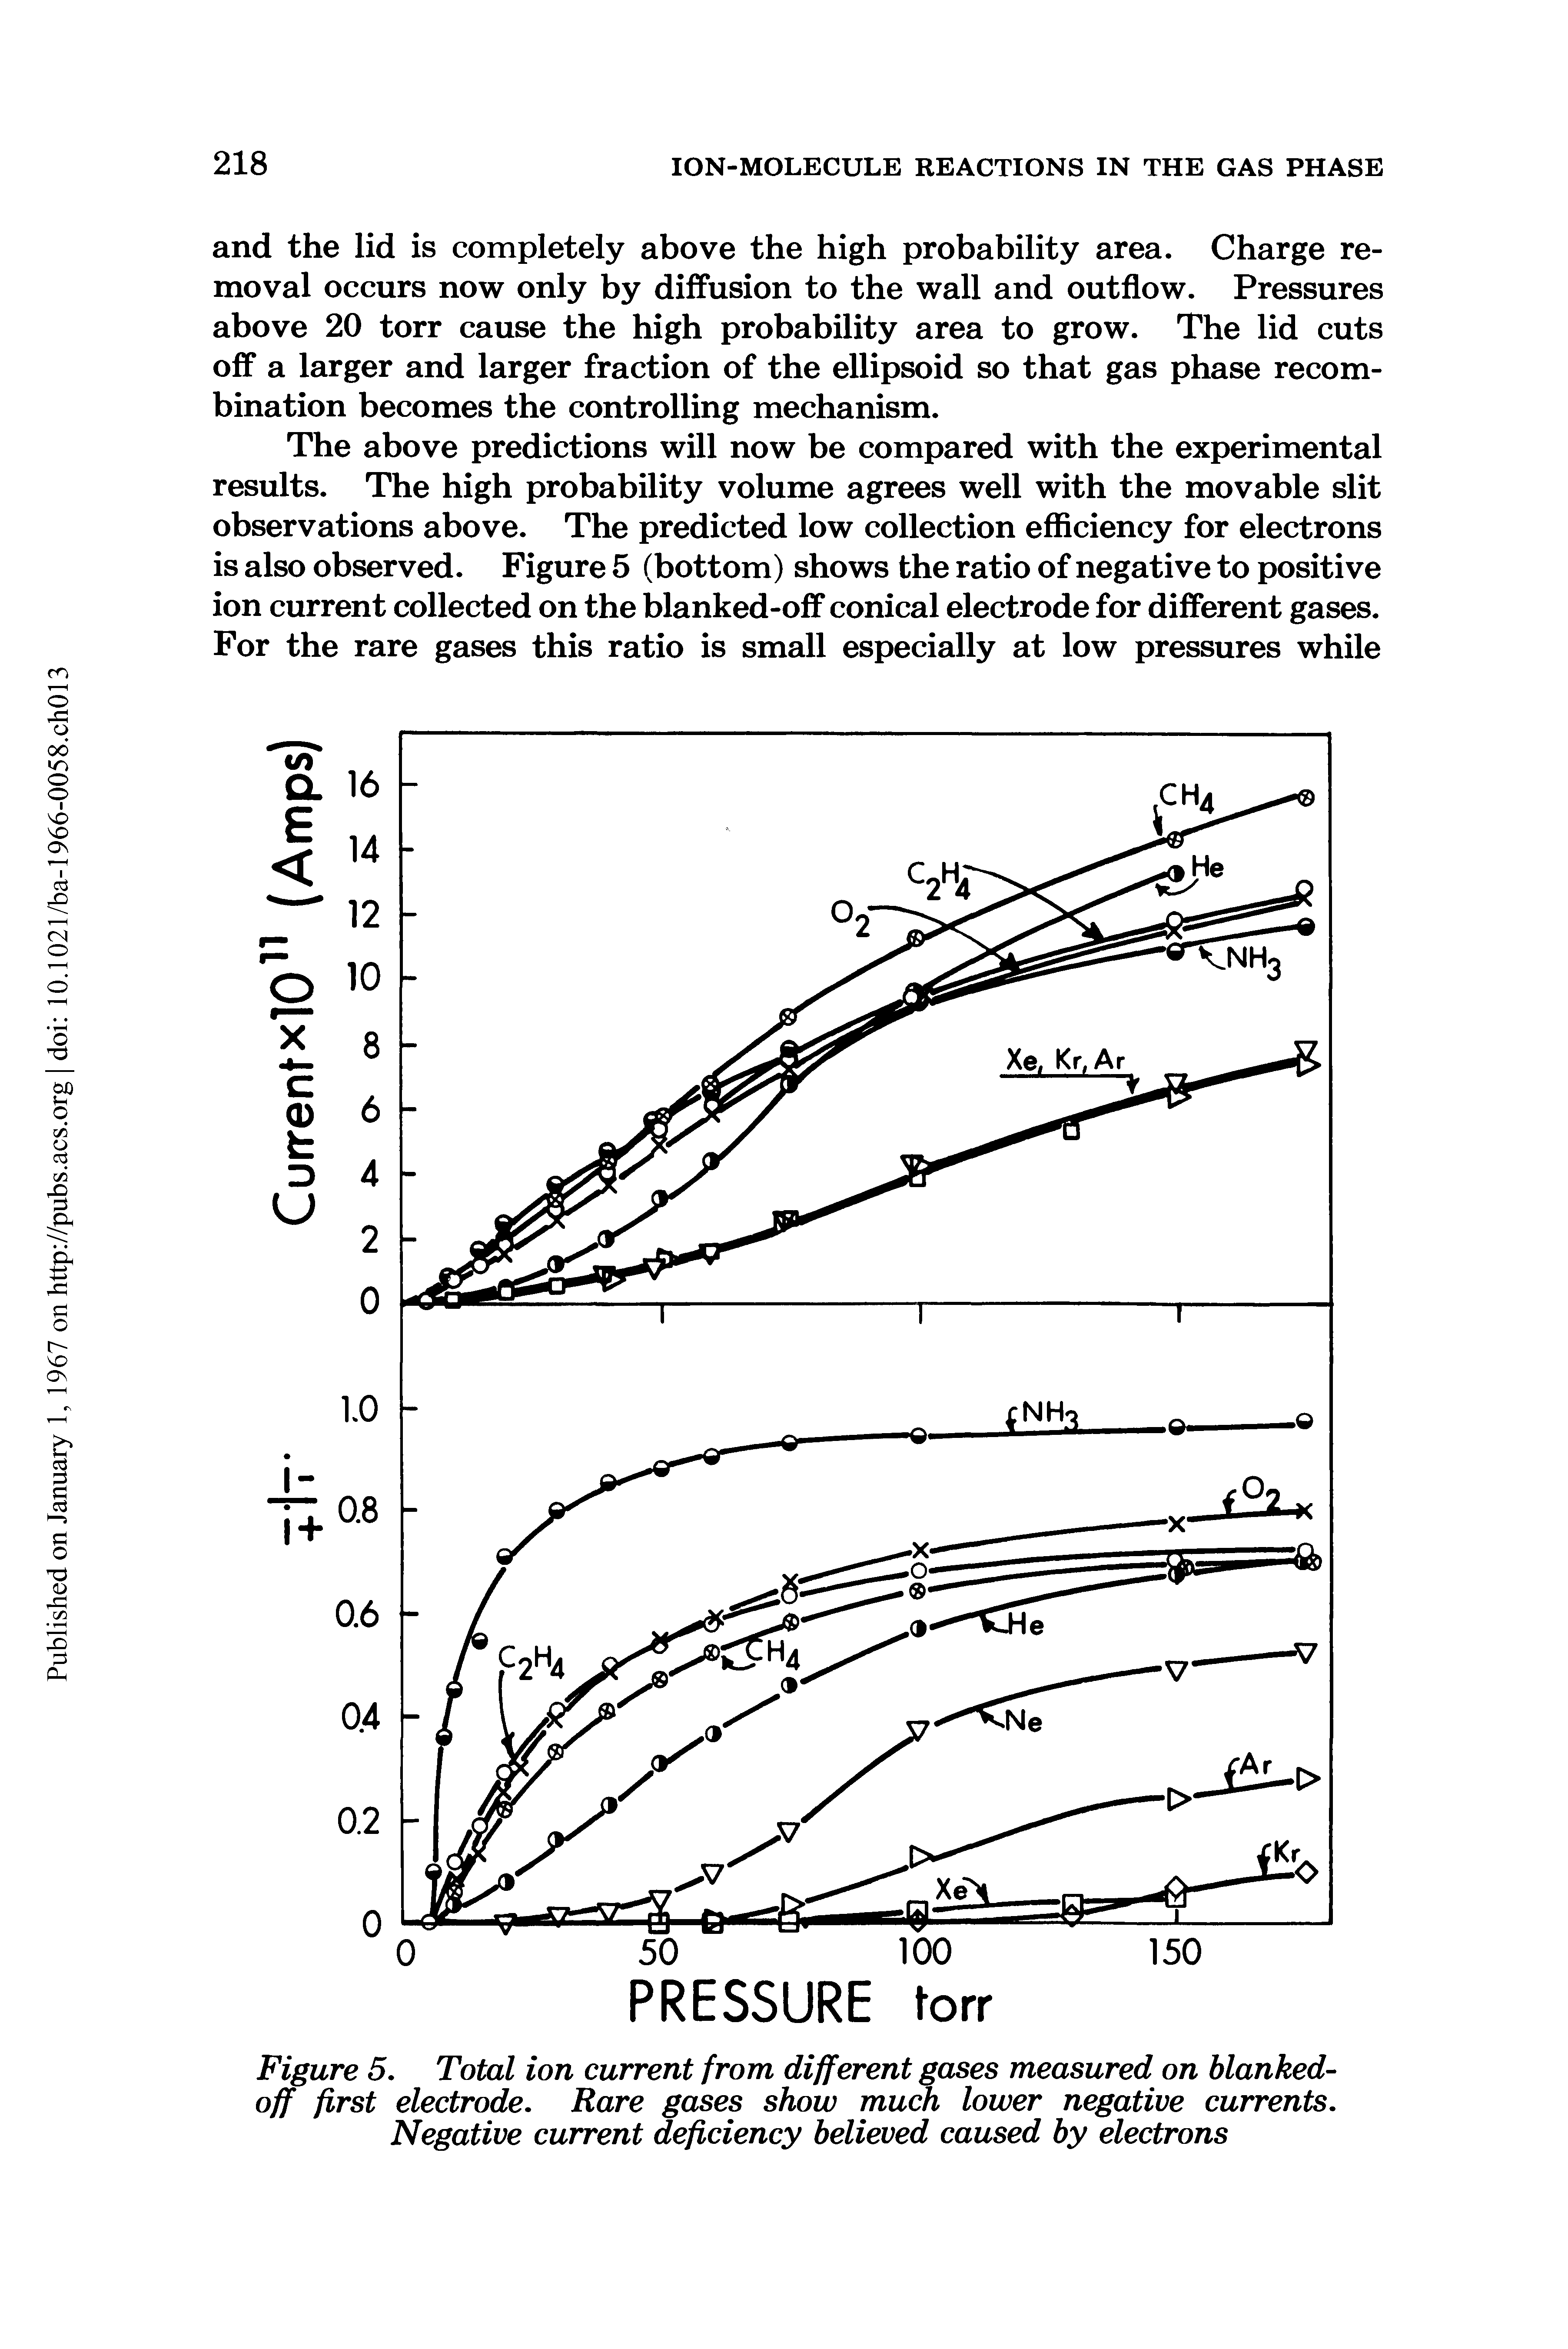 Figure 5. Total ion current from different gases measured on blanked-off first electrode. Rare gases show much lower negative currents. Negative current deficiency believed caused by electrons...